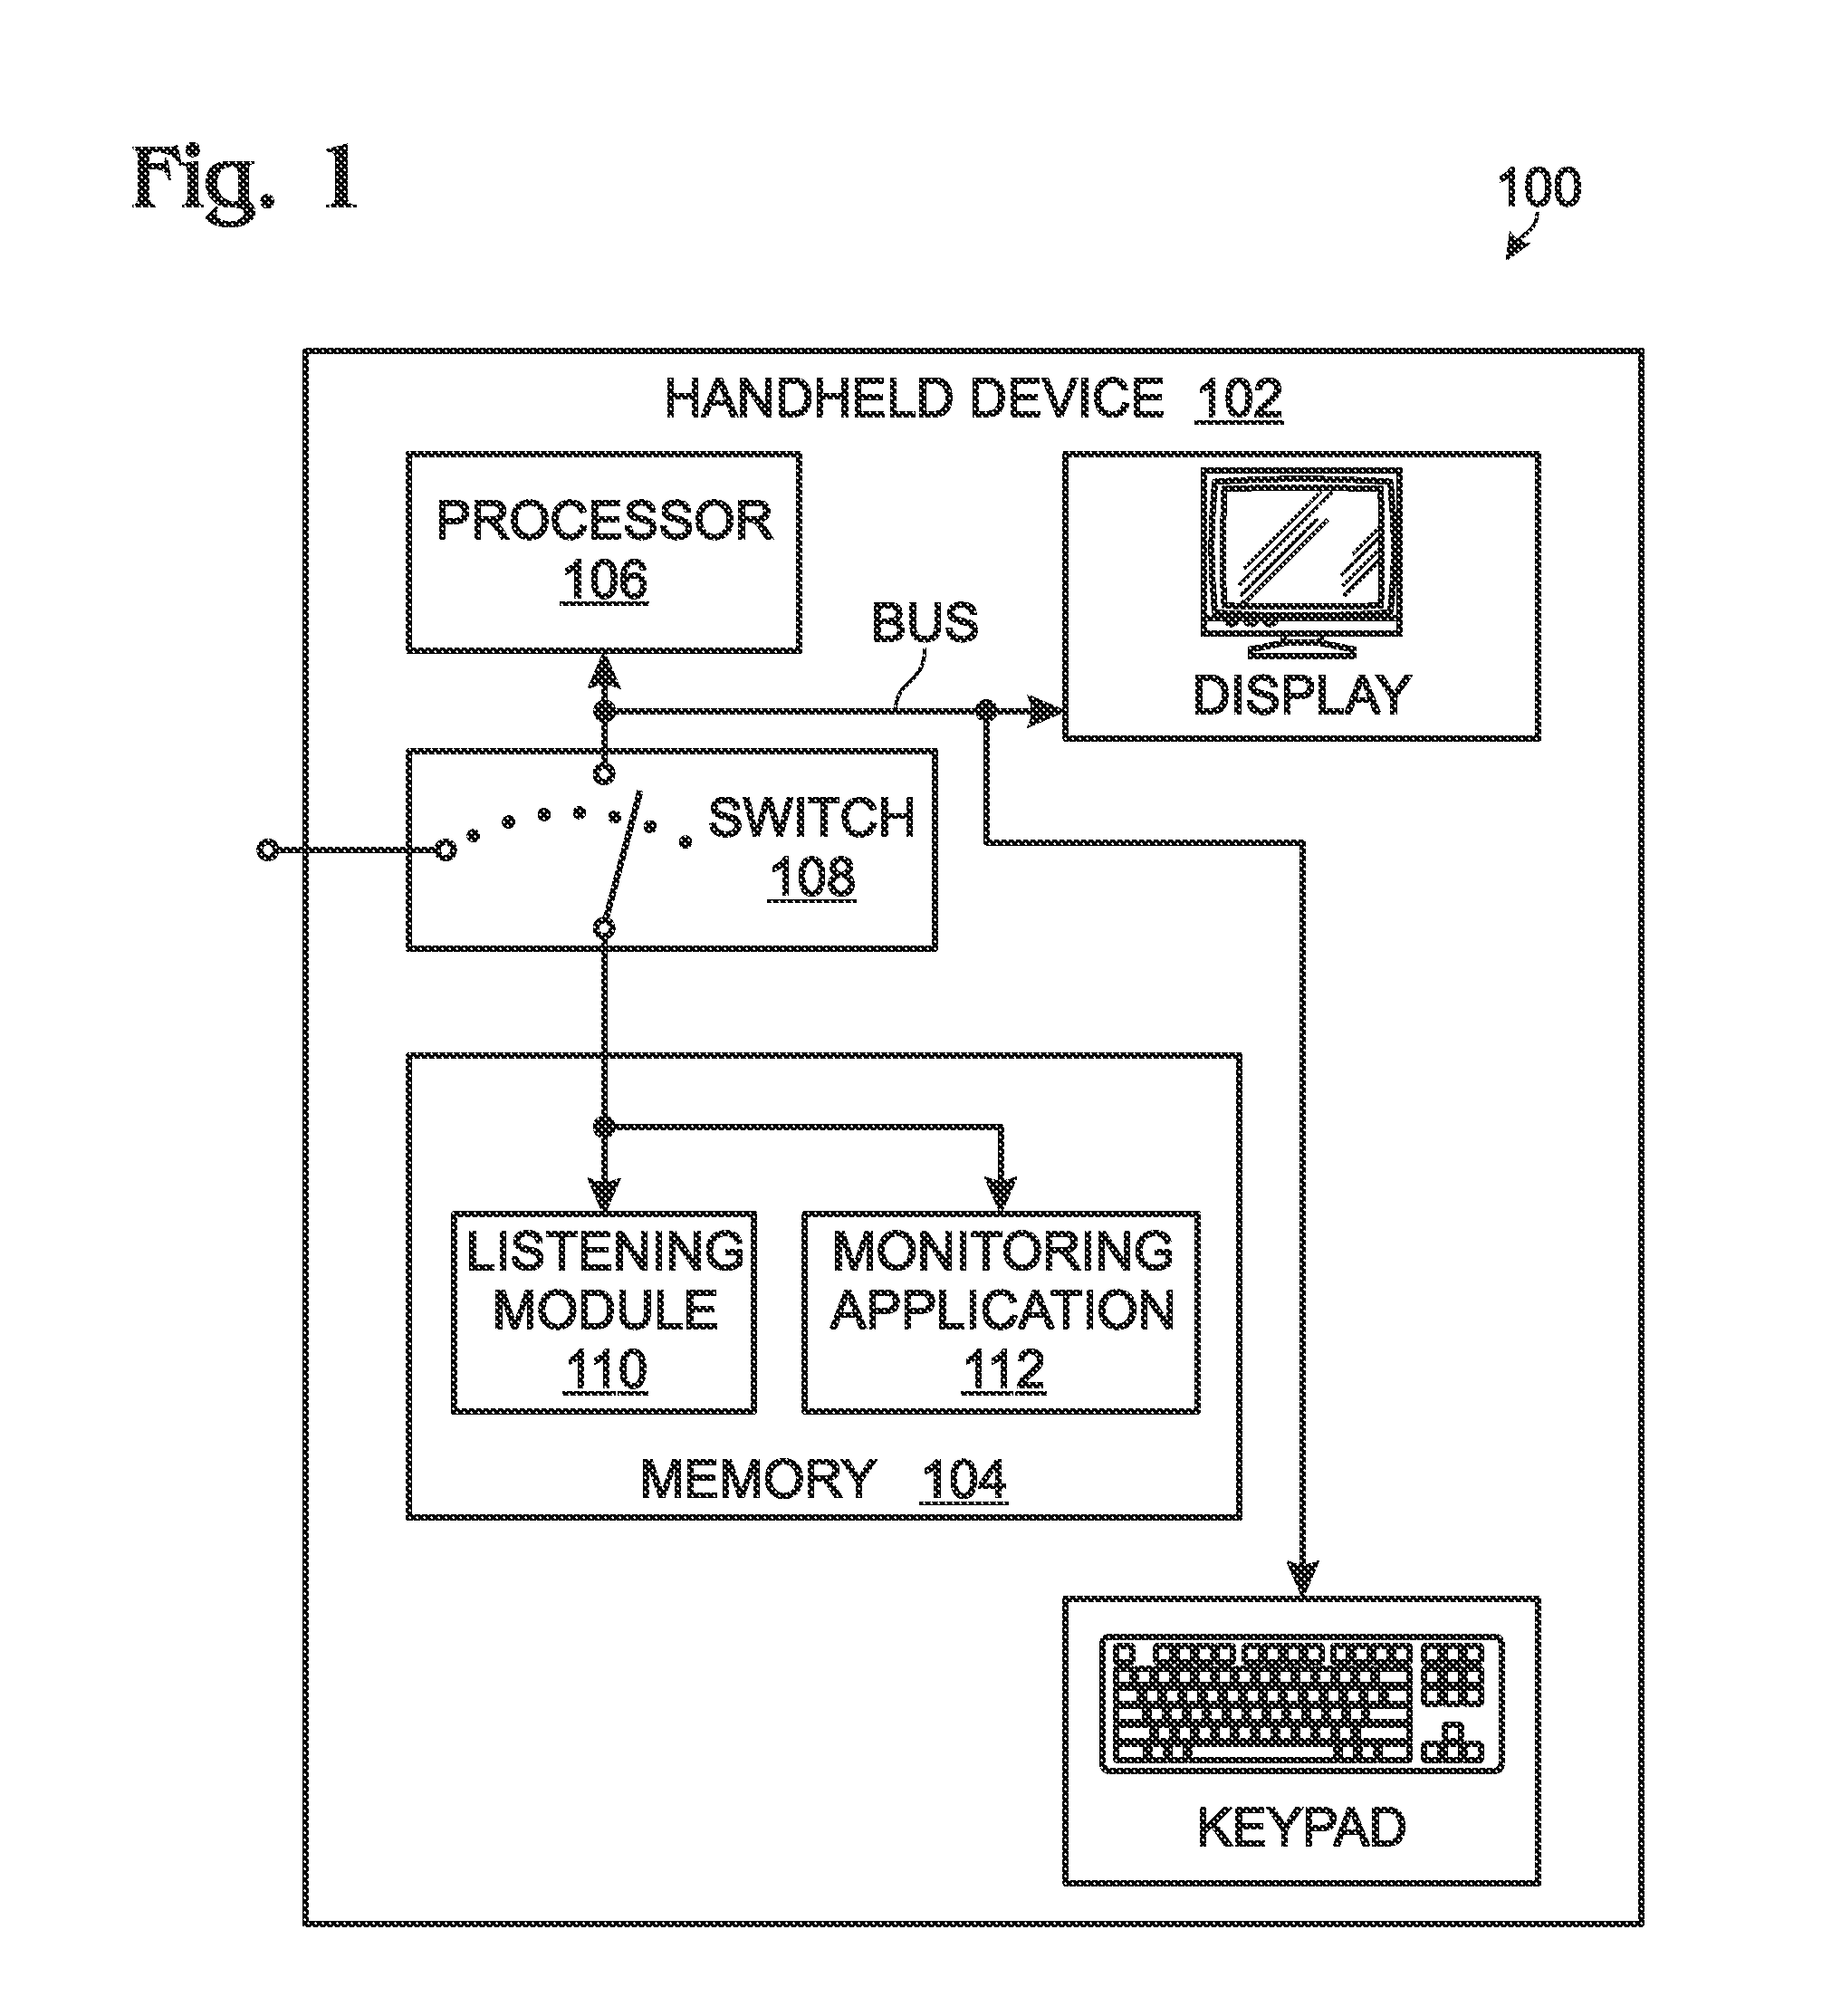 System and Method for Monitoring Handheld Devices in a User Testing Mode